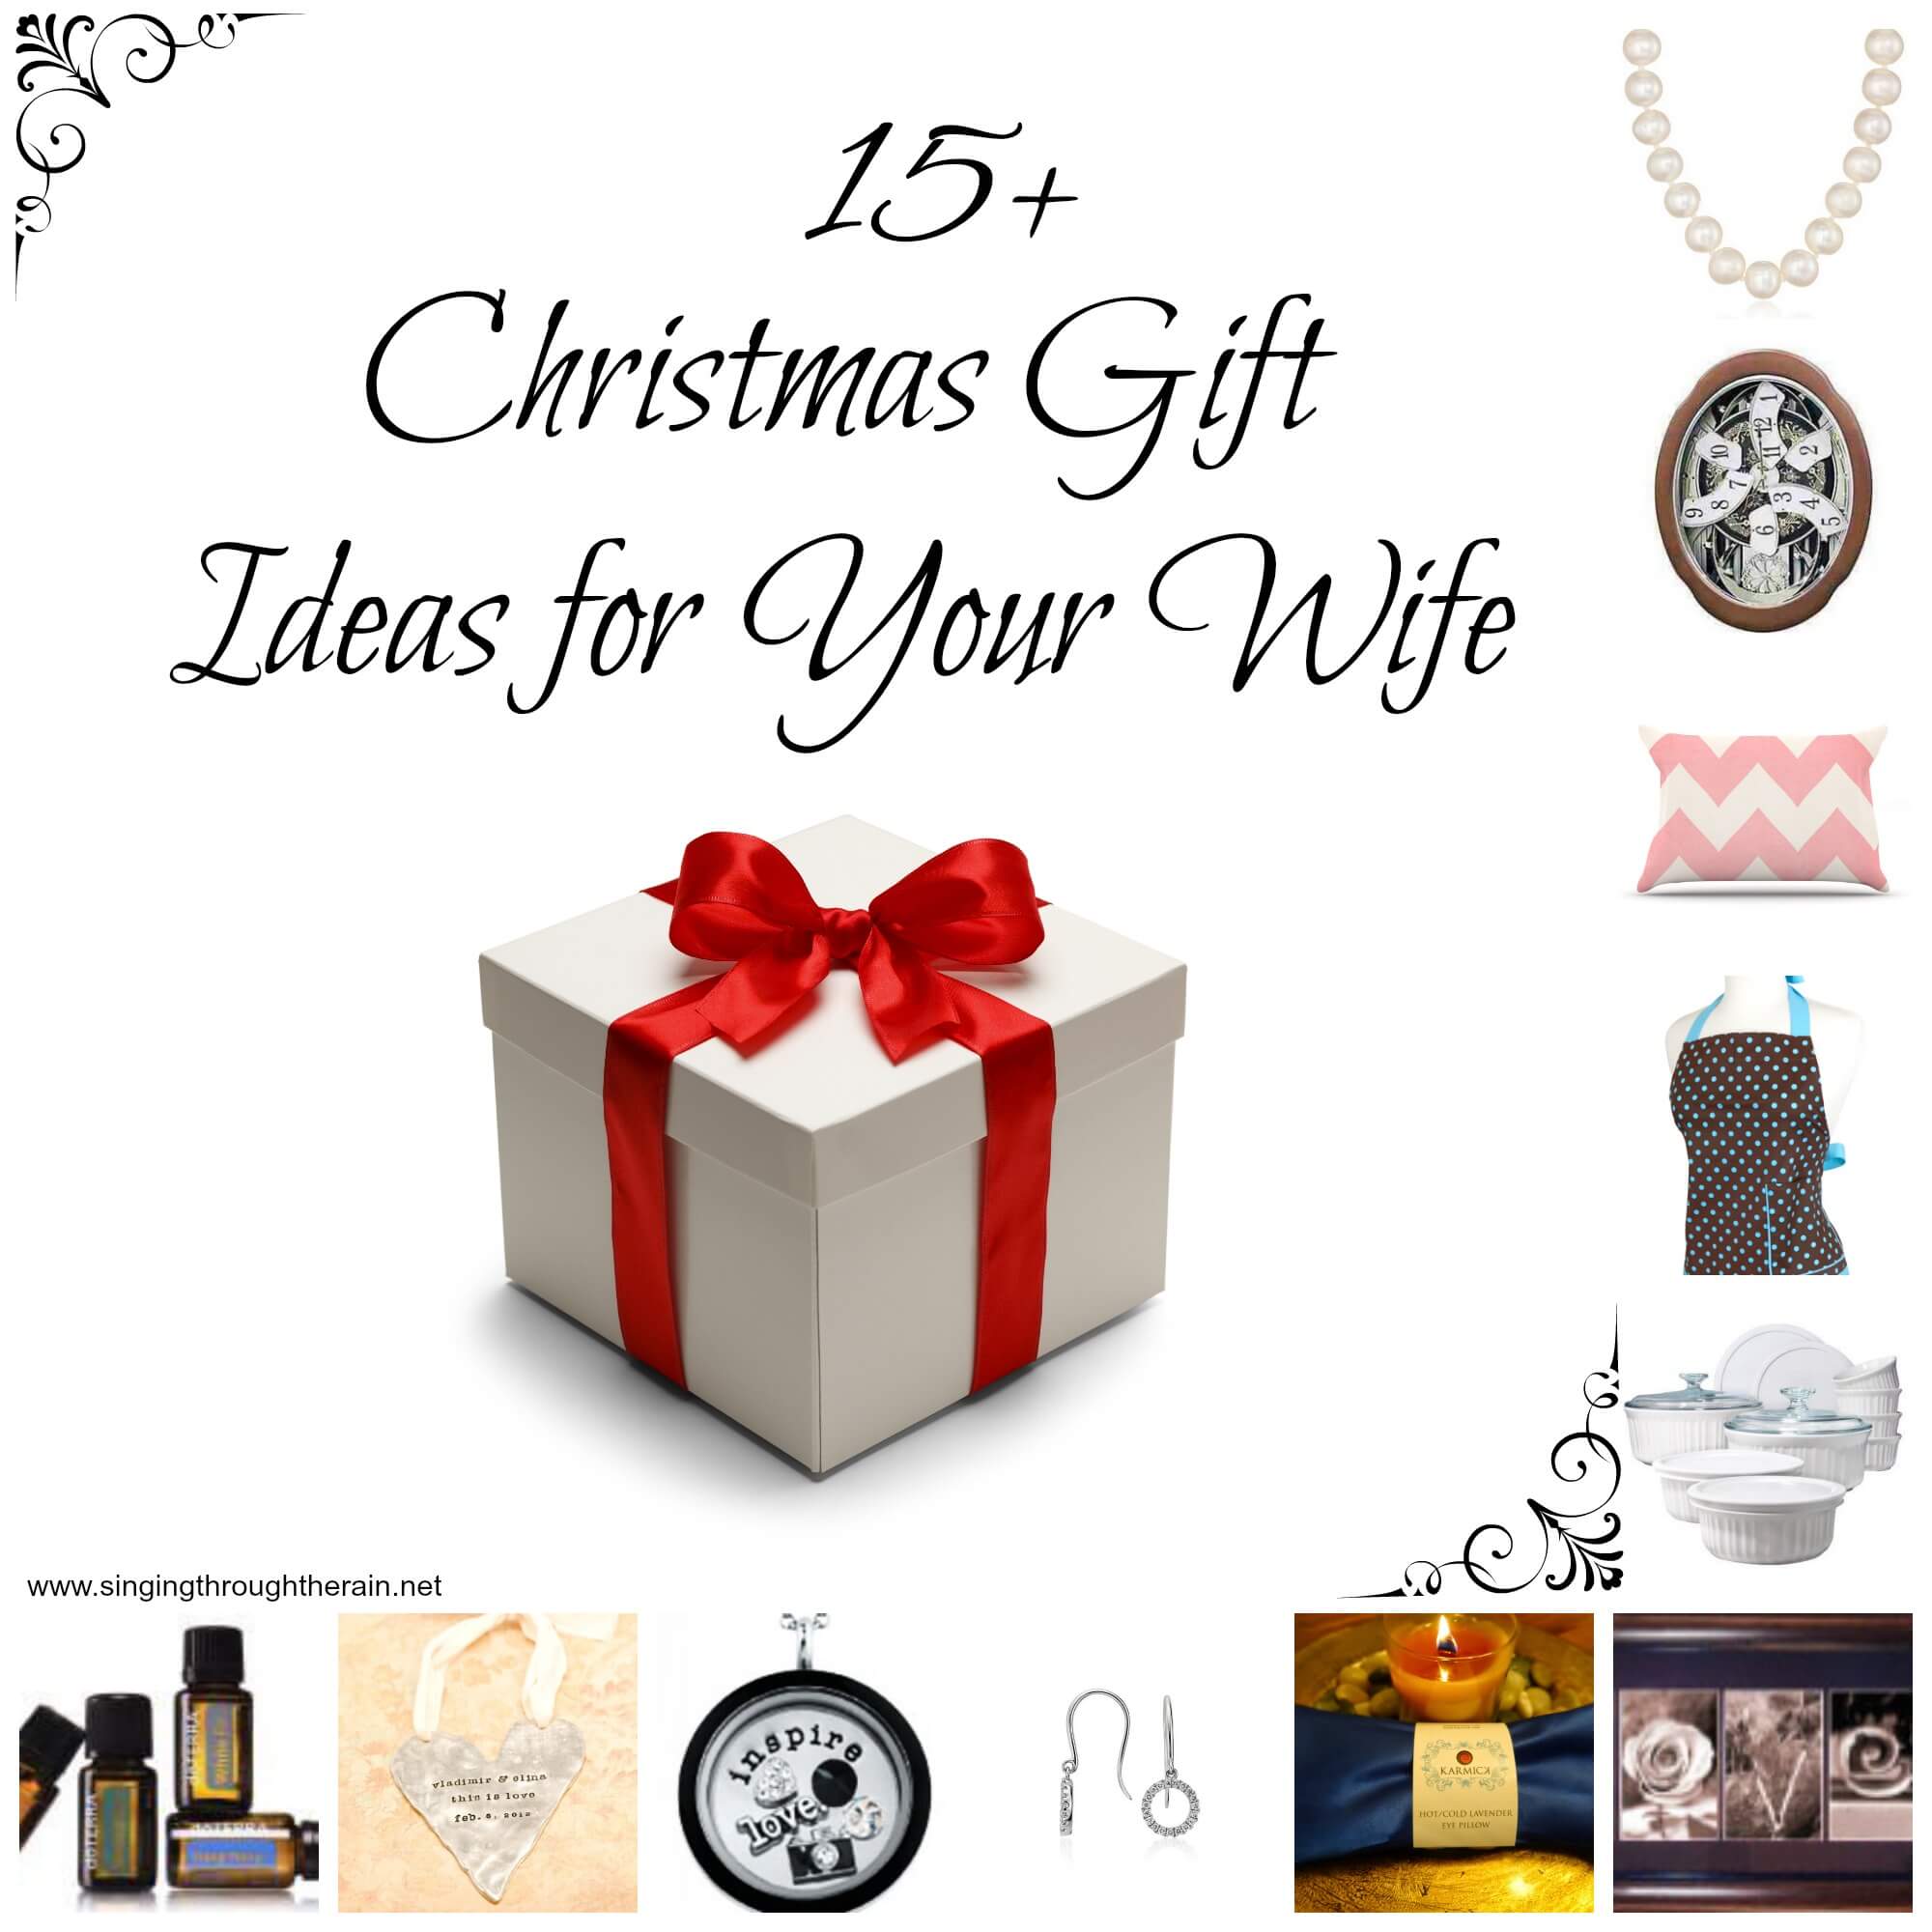 15+ Christmas Gift Ideas for Your Wife